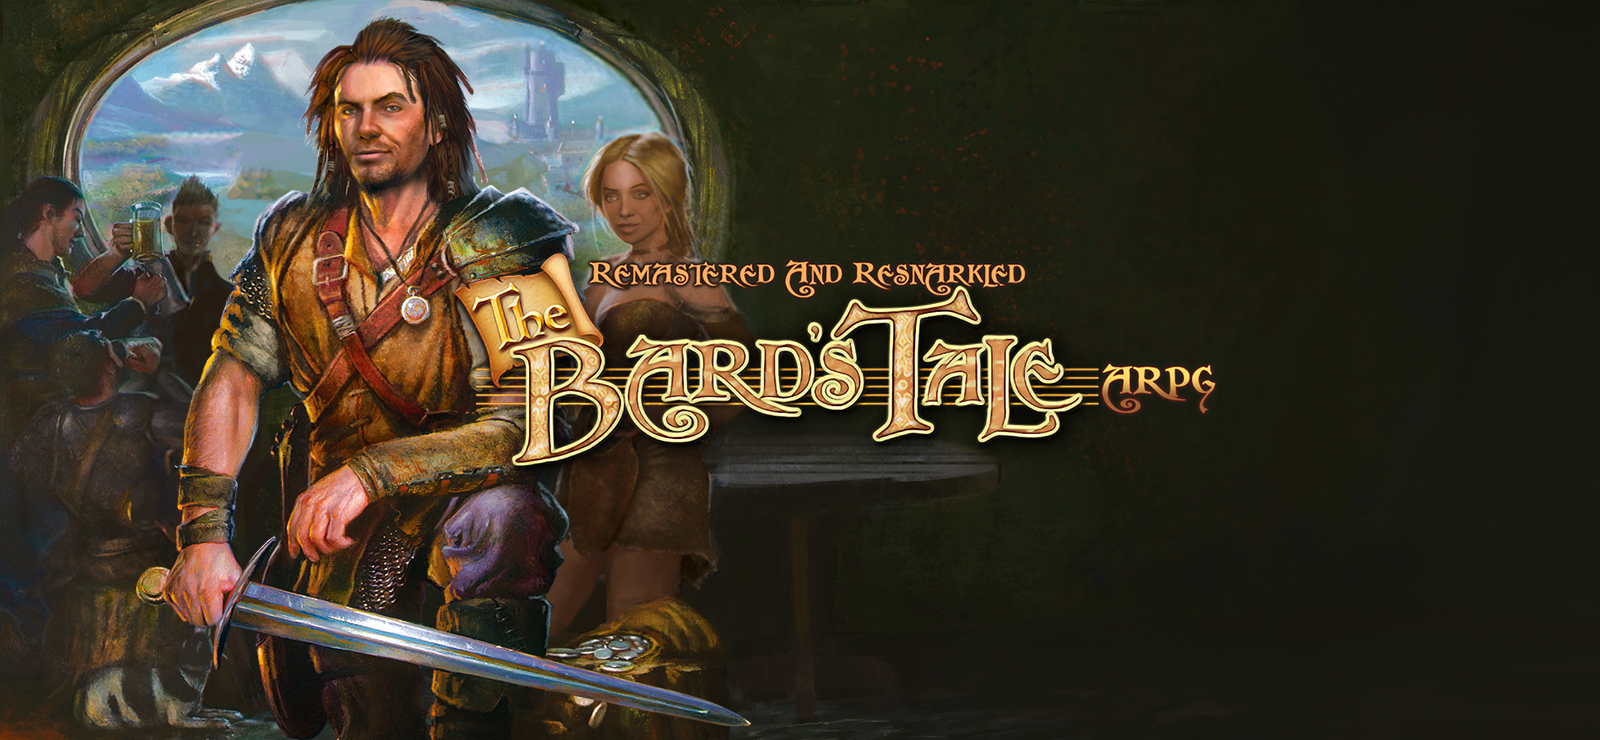 The Bard's Tale ARPG: Remastered And Resnarkled